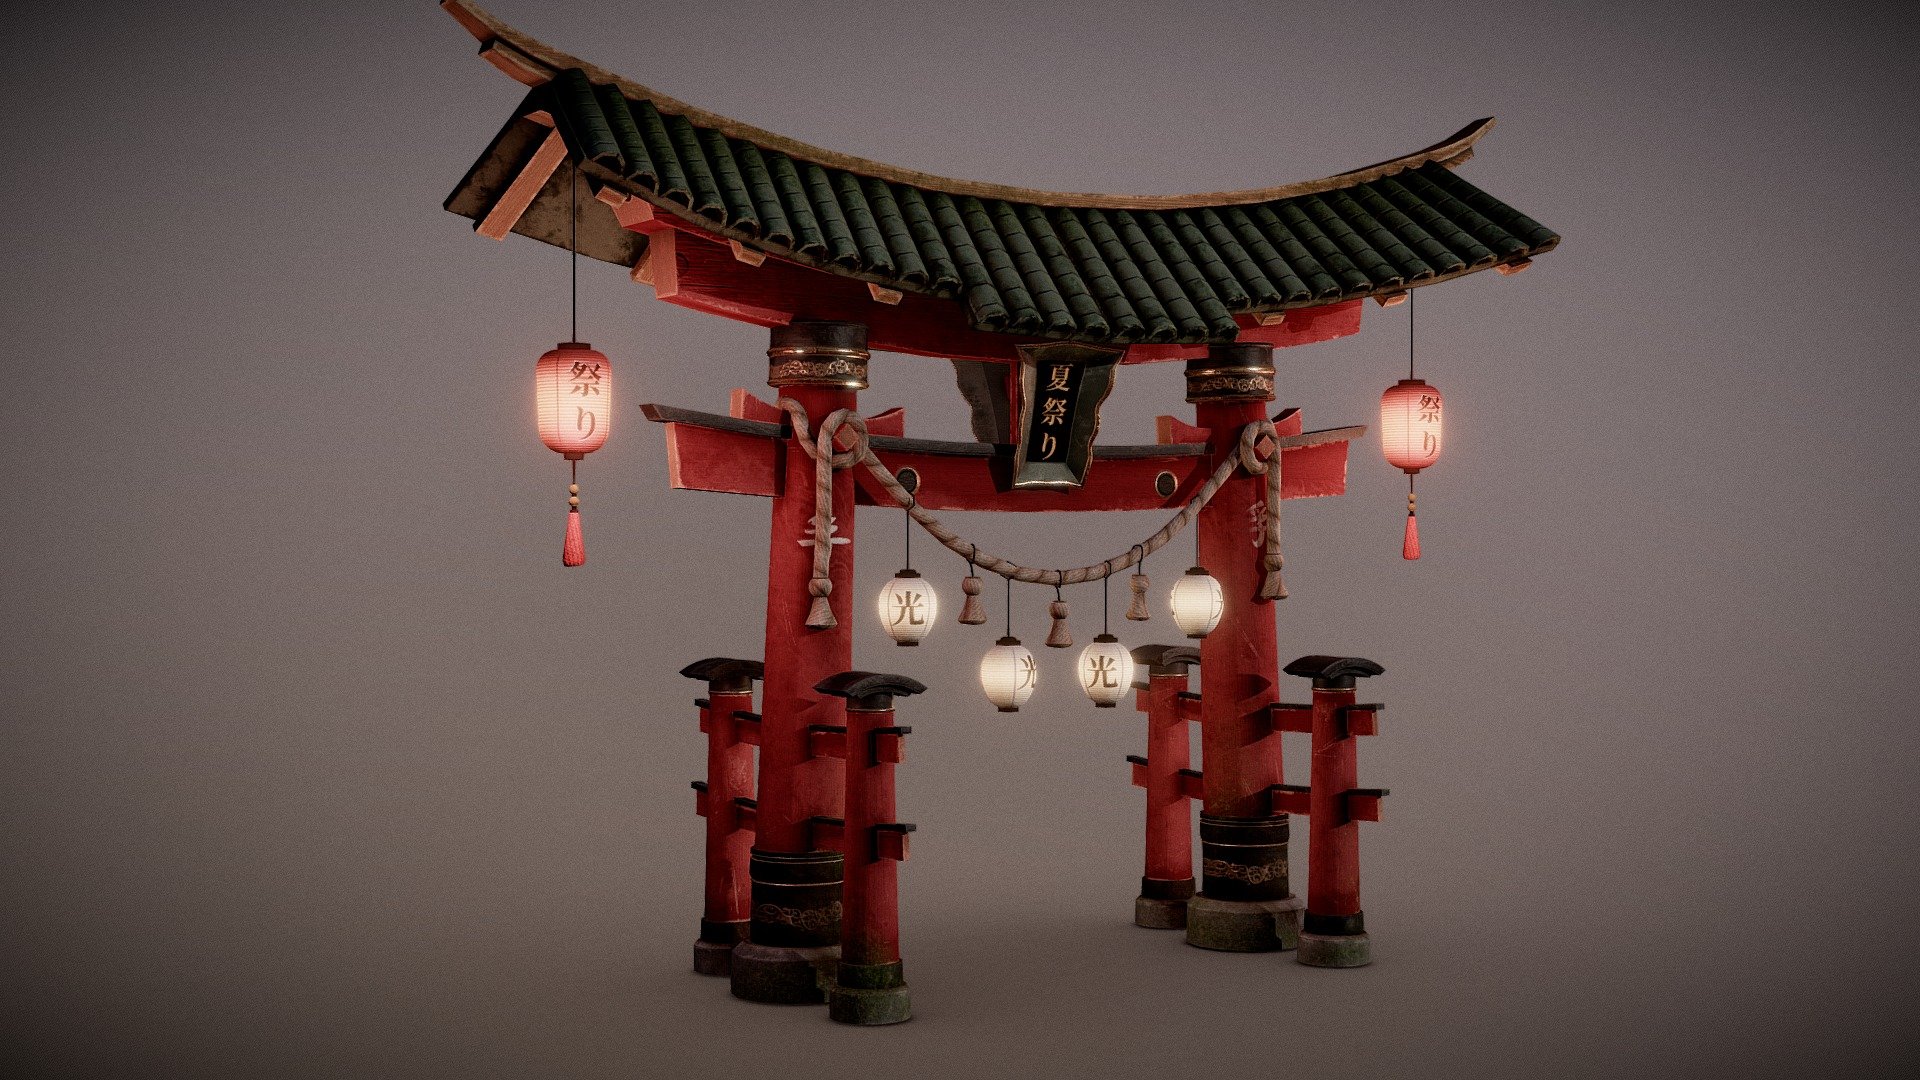 Japanese Festive Torii gate created for a commission!
2 Mats
4k textures

Created in Blender 4.0 and texutred in Substance Painter
Normals and baked maps created in Substance painter - Japan Torii Gate - 3D model by LegendsVR (@legendsvrc) 3d model